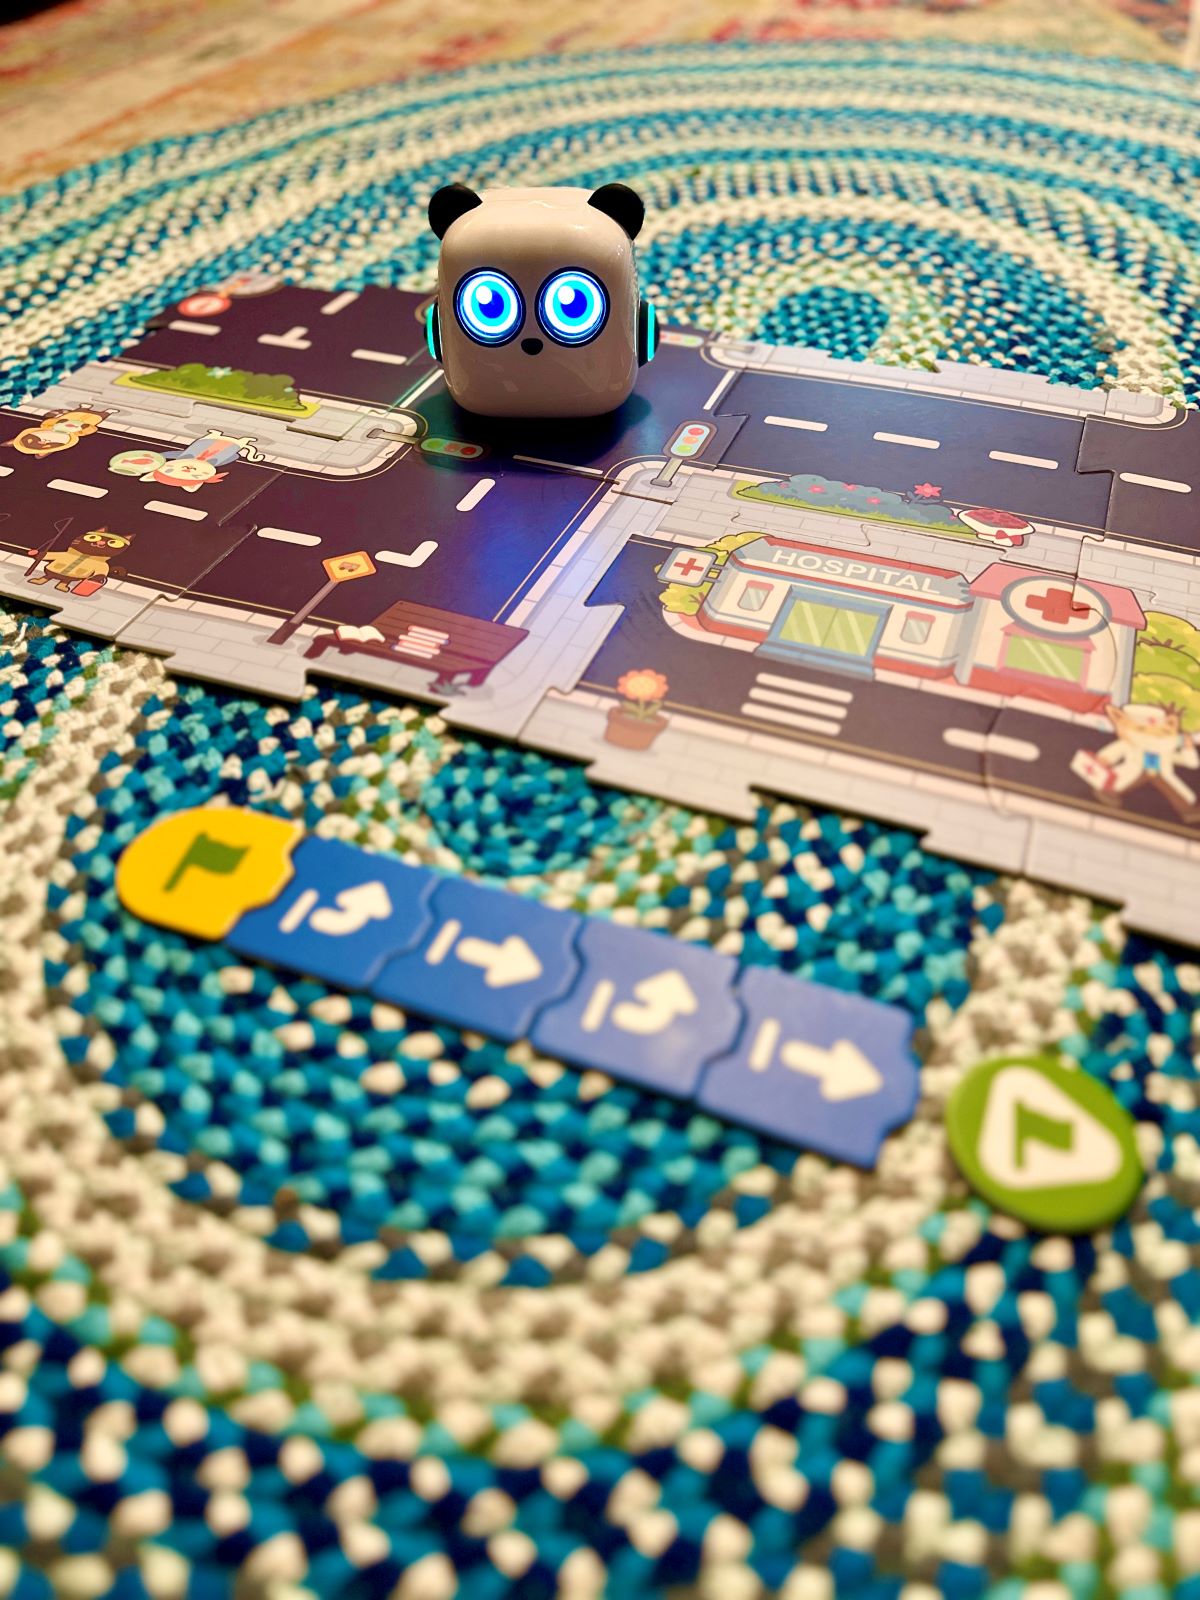 The mTiny robot toy on the road puzzle pieces.